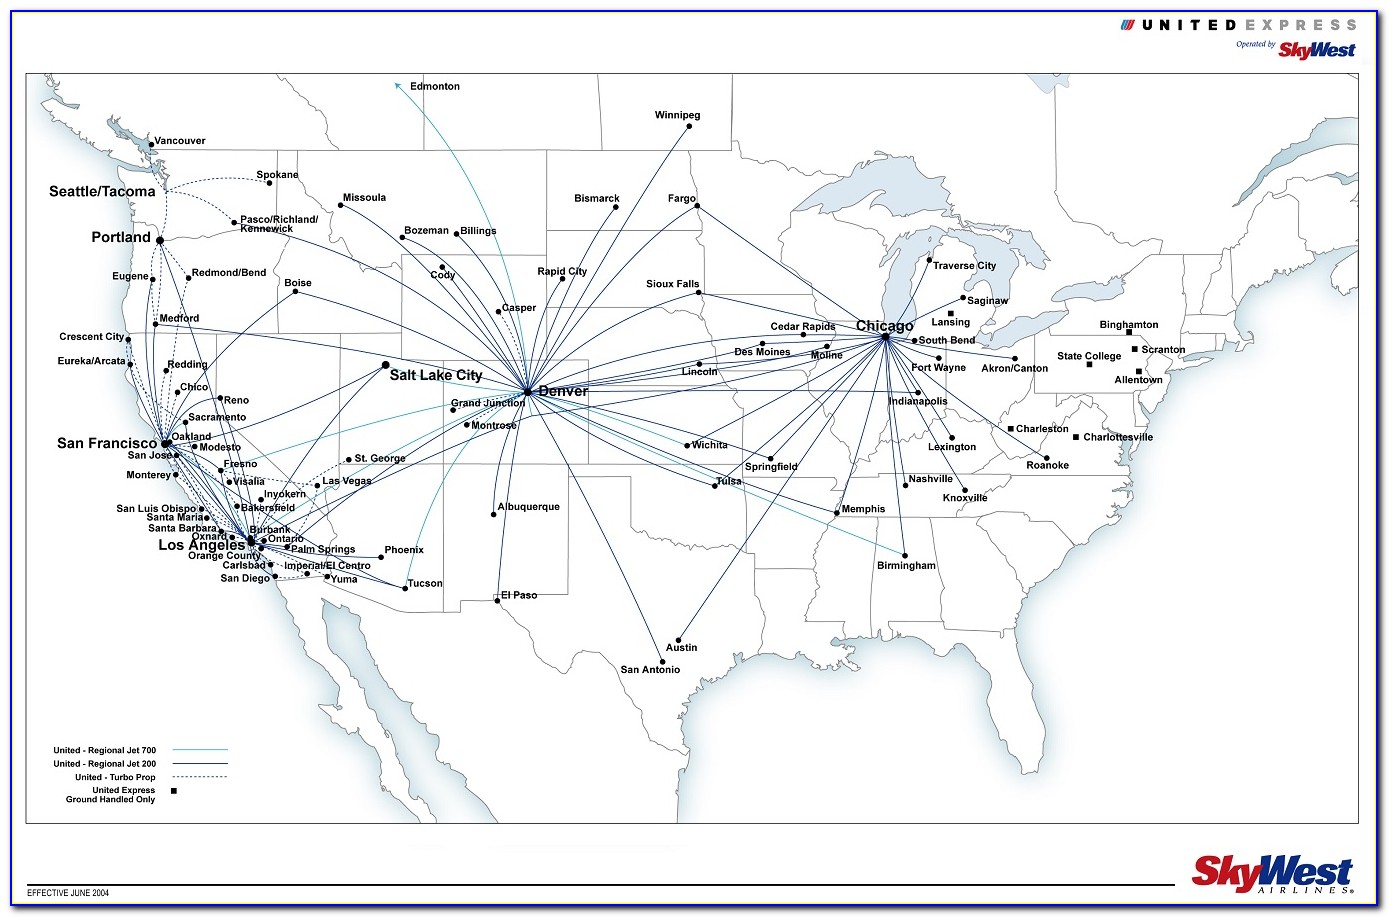 Alaska Airlines Skywest Route Map